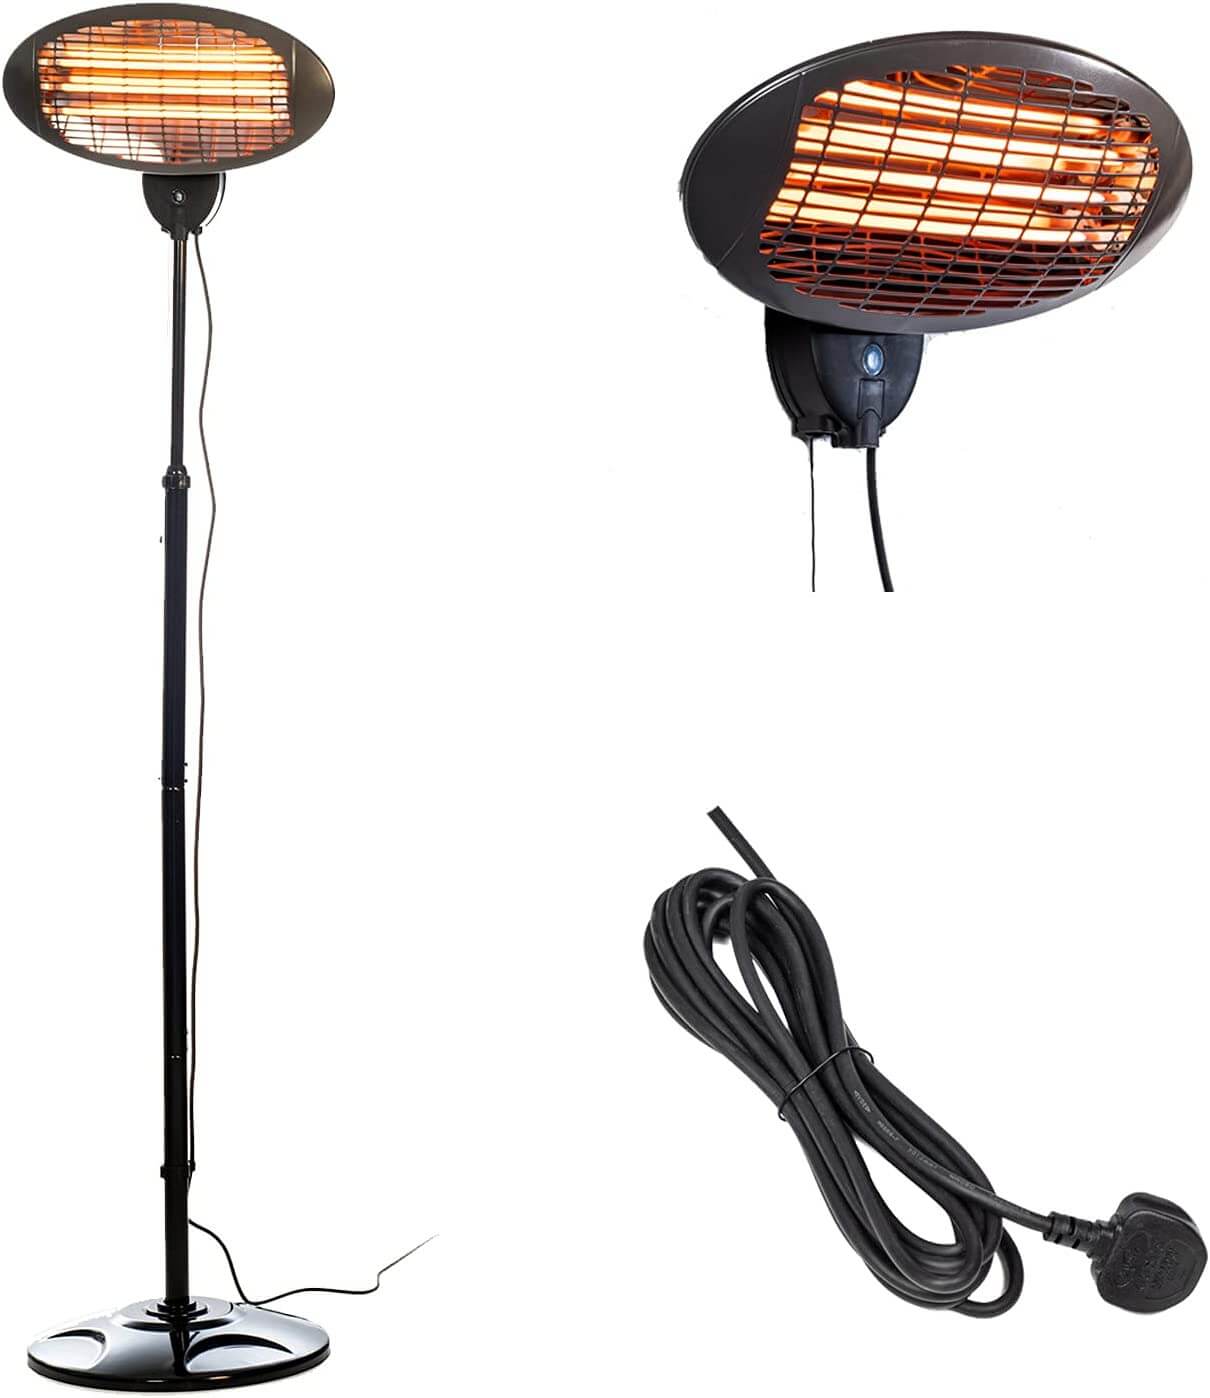 2000W Electric Outdoor Patio Heater Freestanding or Wall Fitted. Grey 2KW